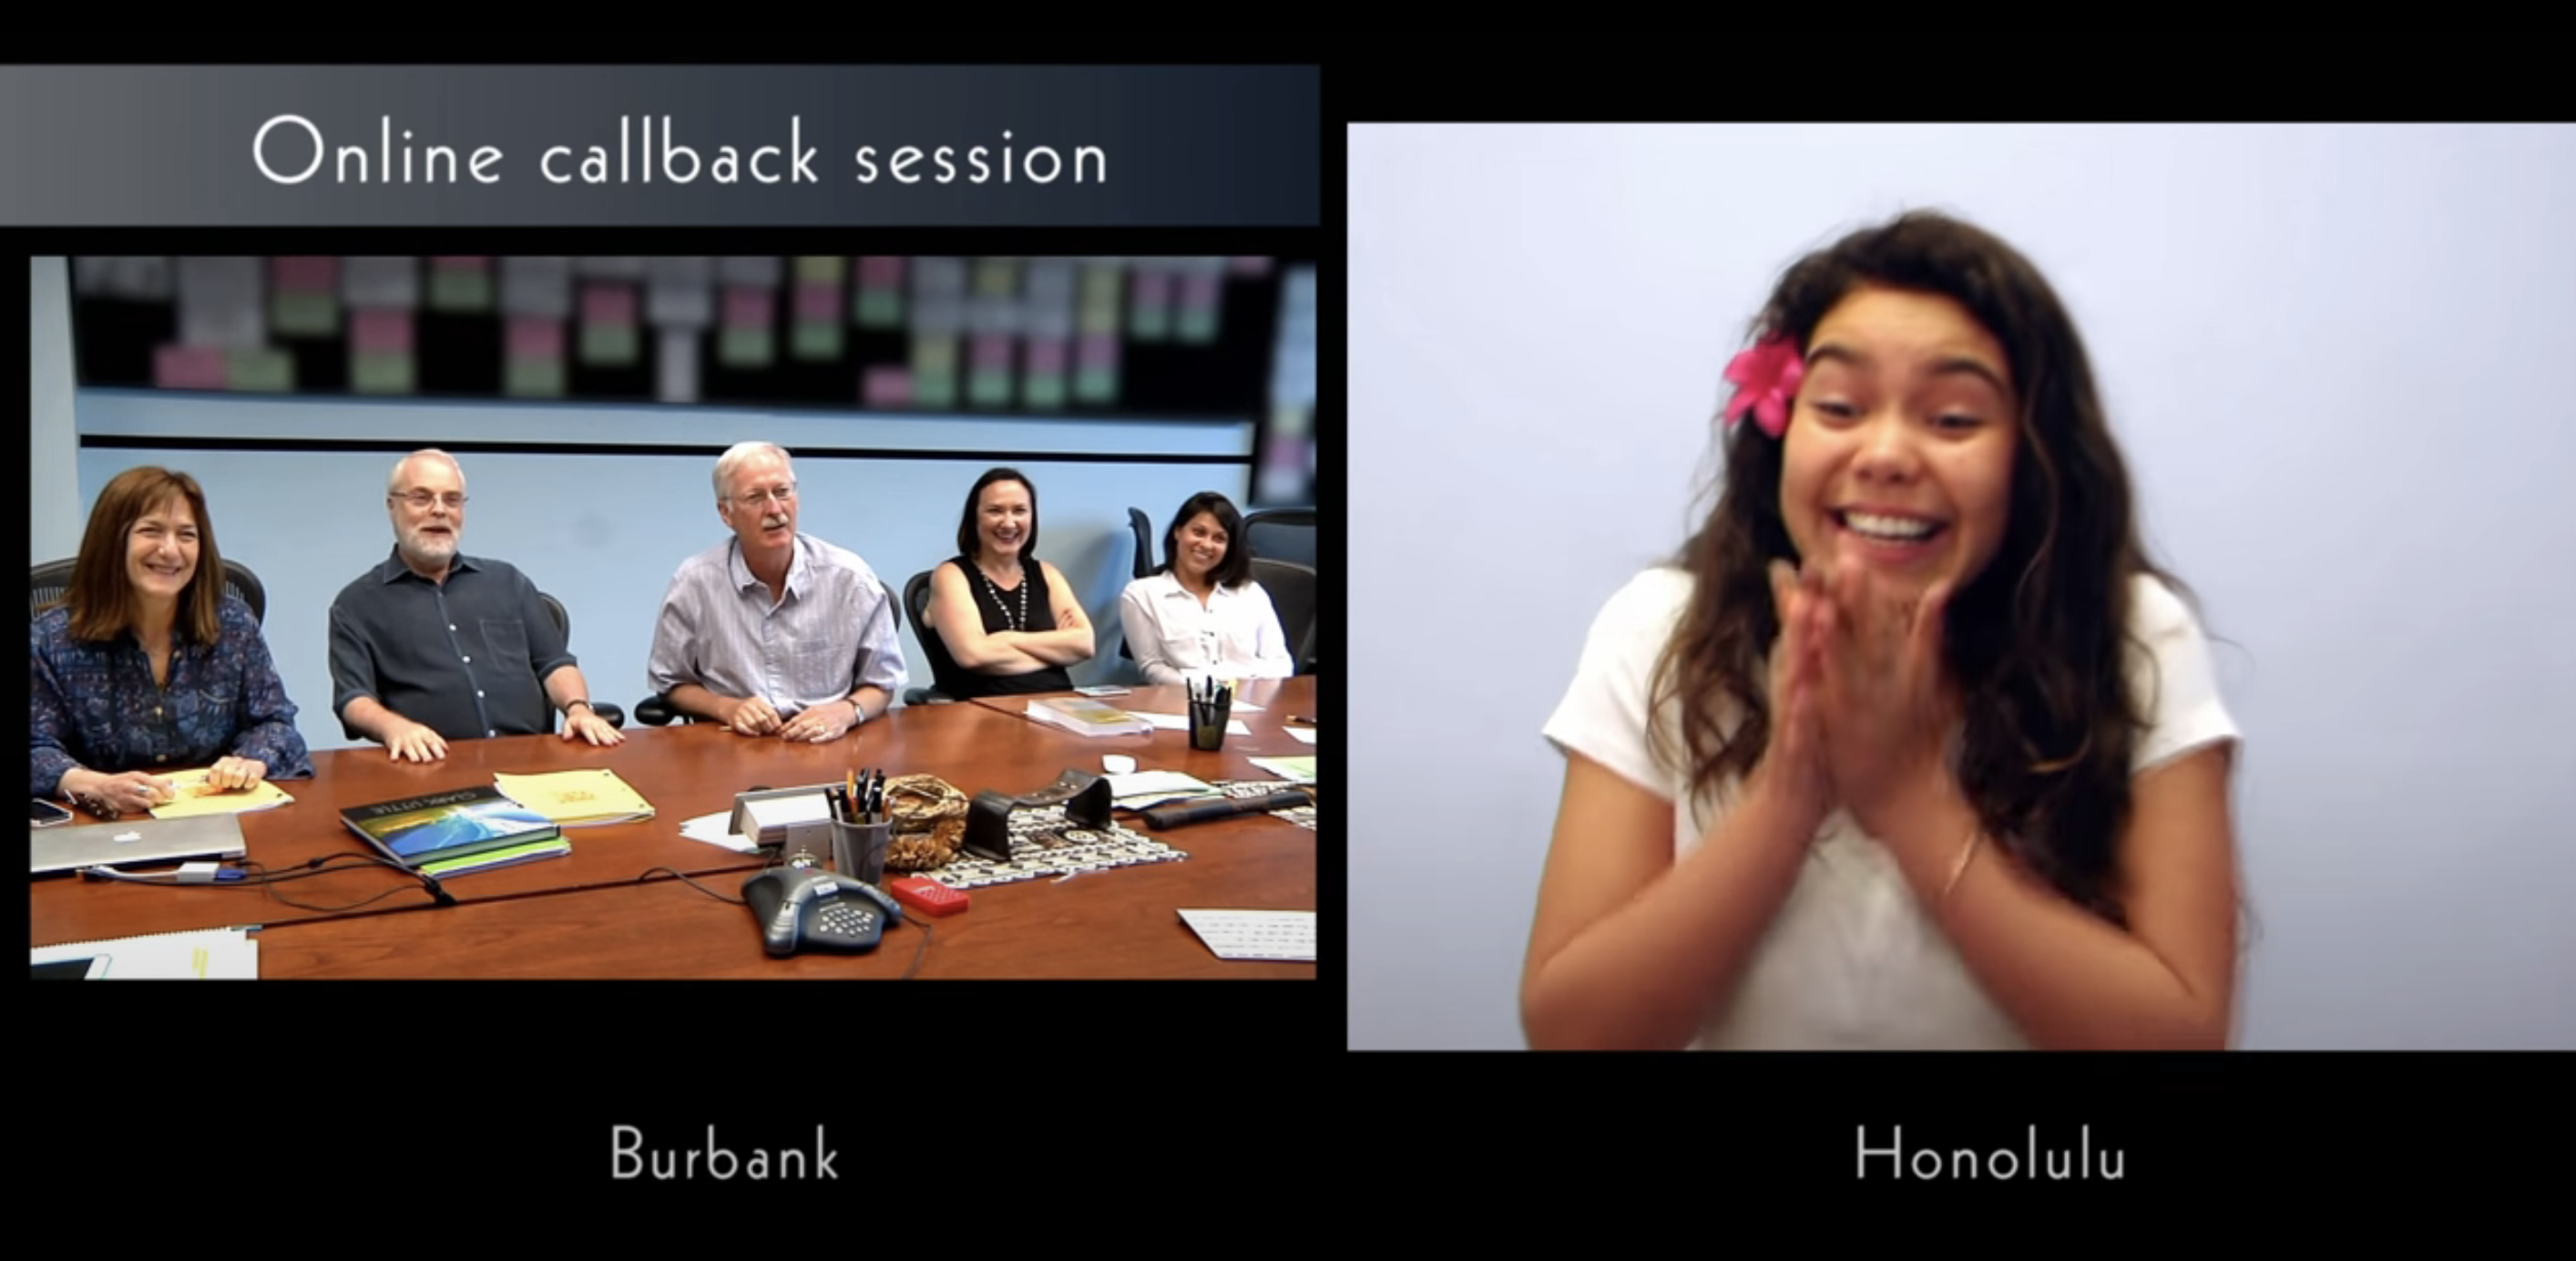 Split-screen video call with smiling people in a conference room on the left and an excited woman on the right